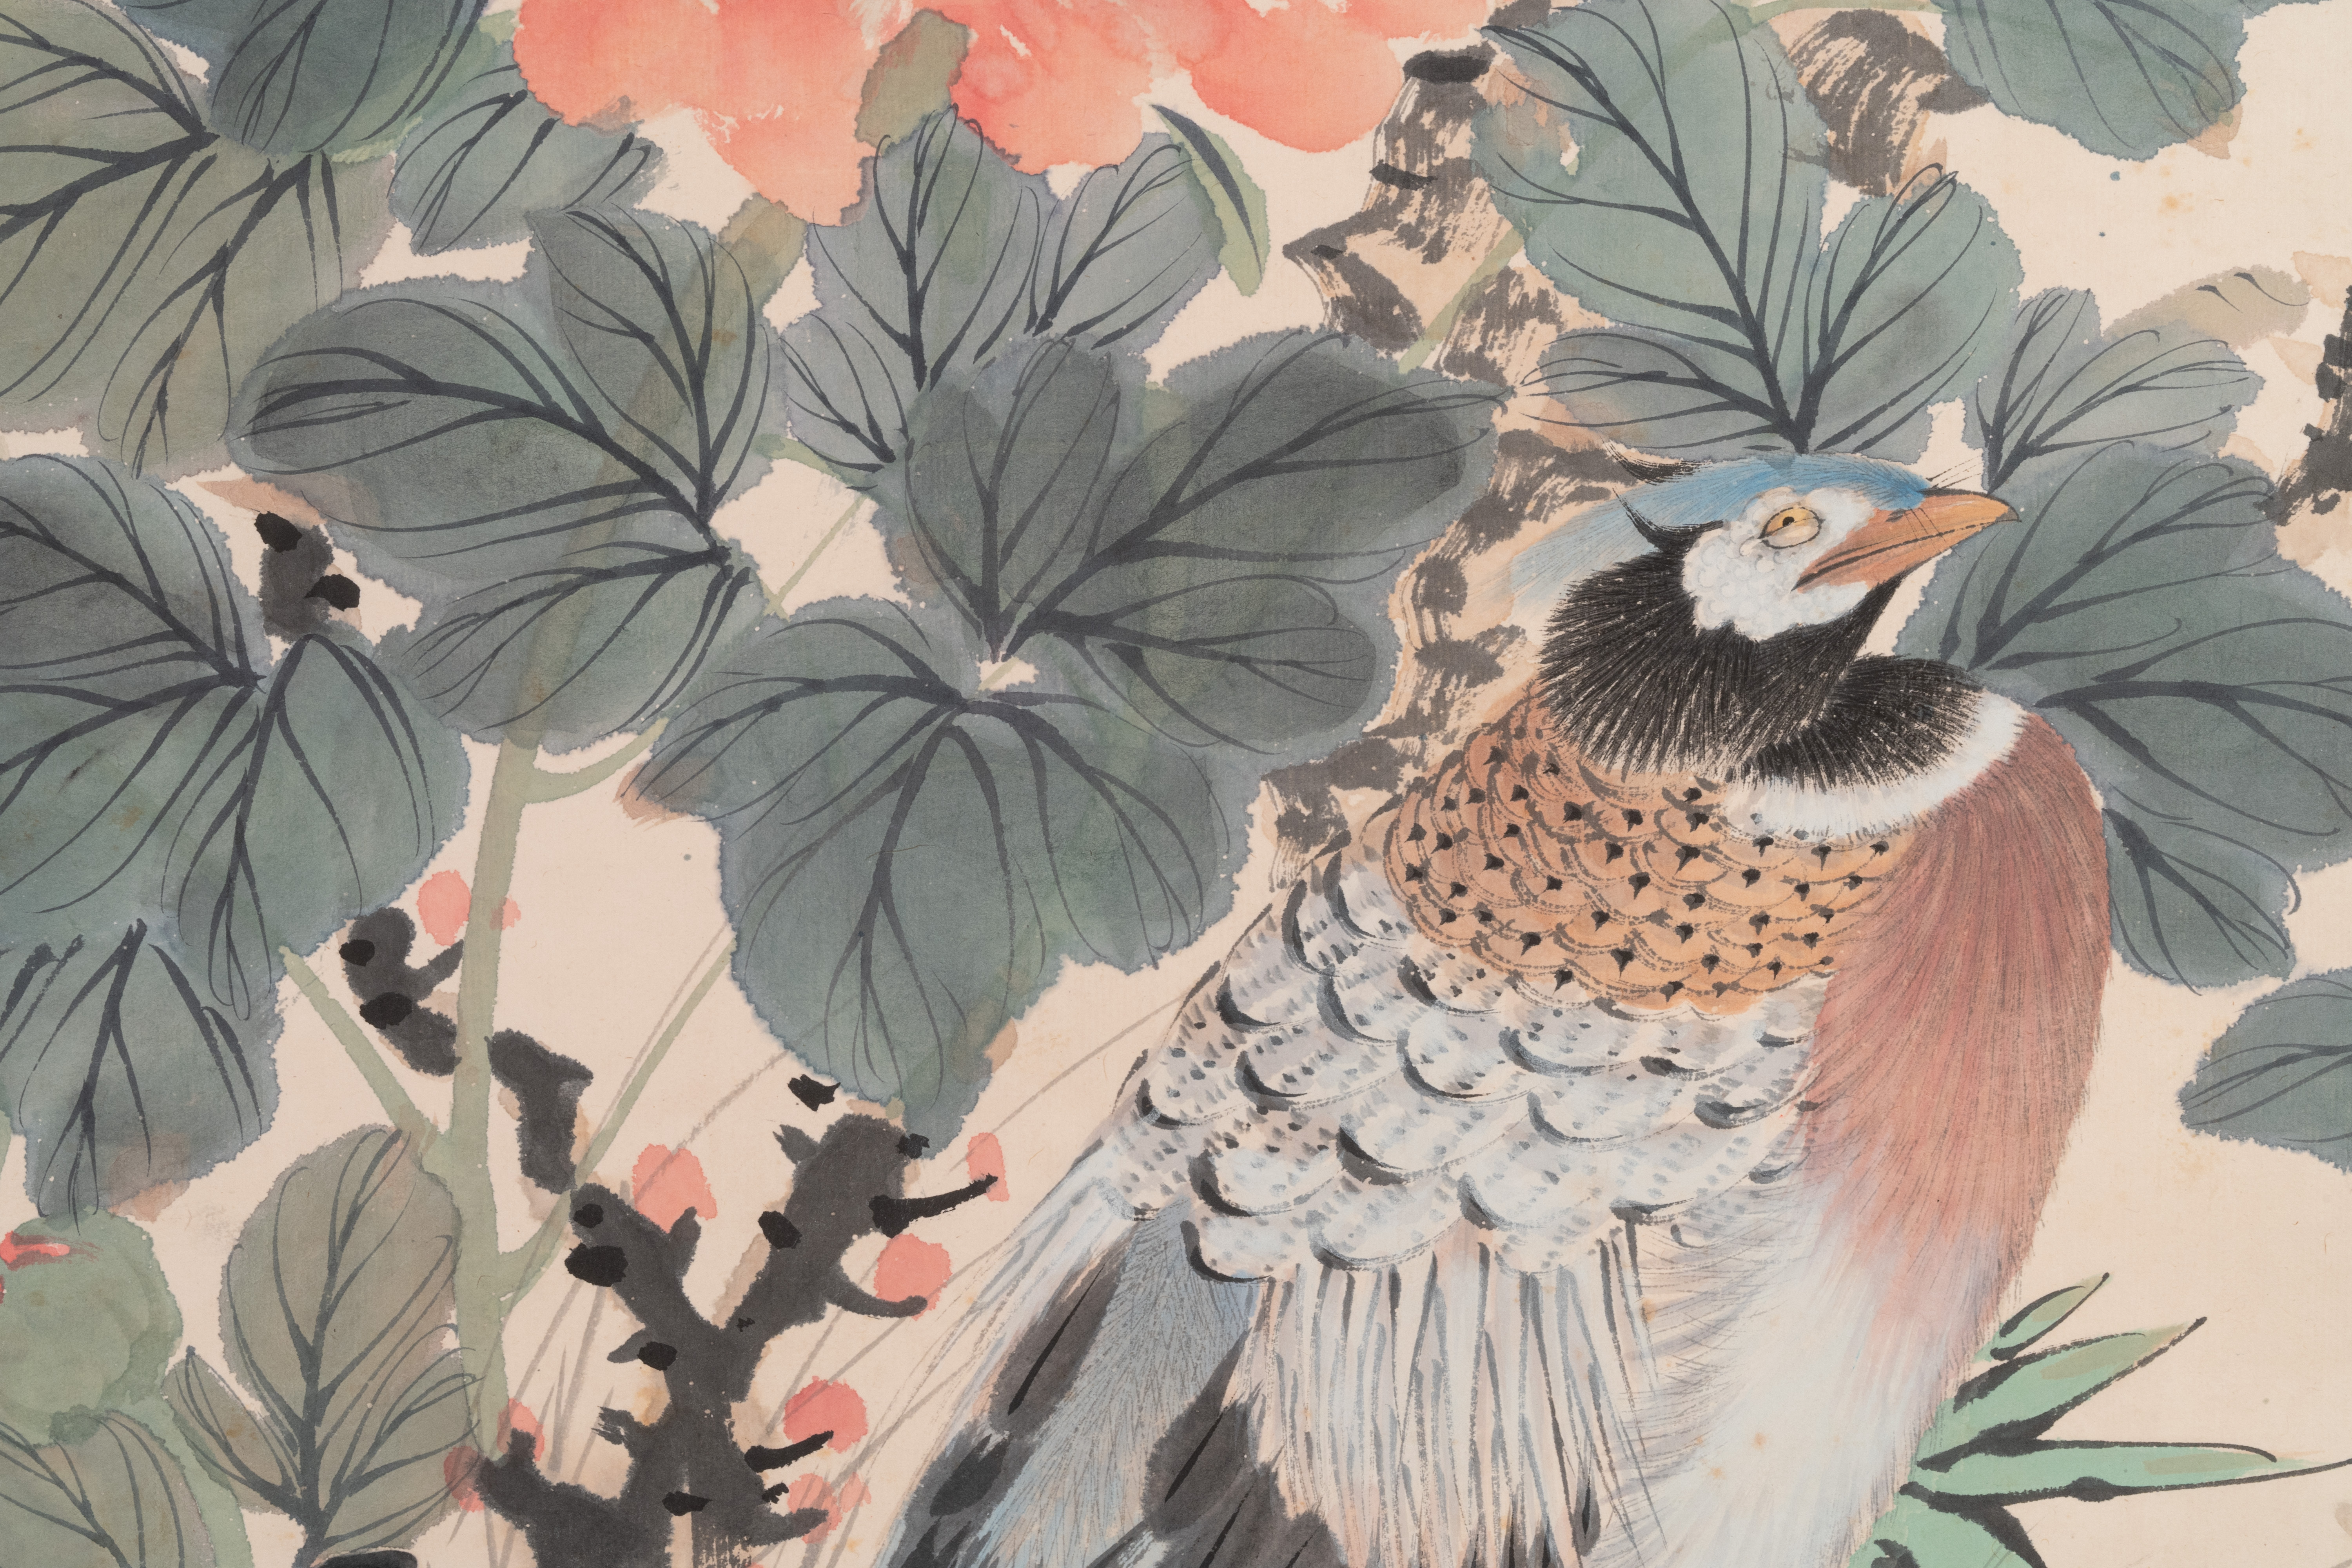 Tian Shiguang ç”°ä¸–å…‰ (1916-1999): 'Birds and flowers', ink and colour on paper - Image 6 of 7